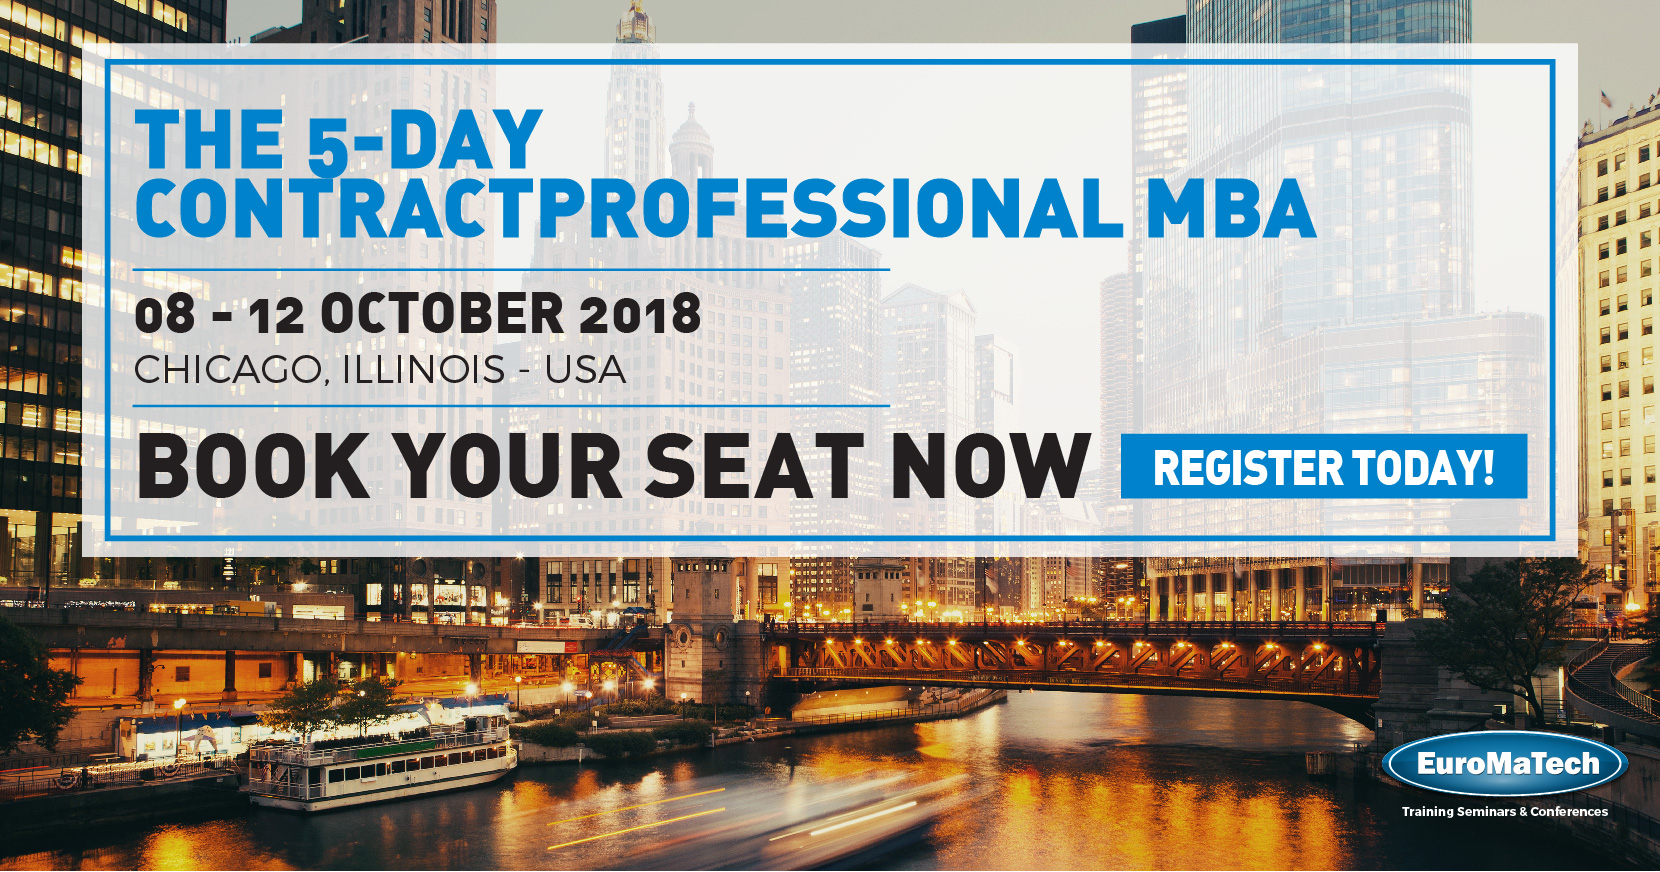 The 5-day Contract Professional MBA Training Course in Chicago